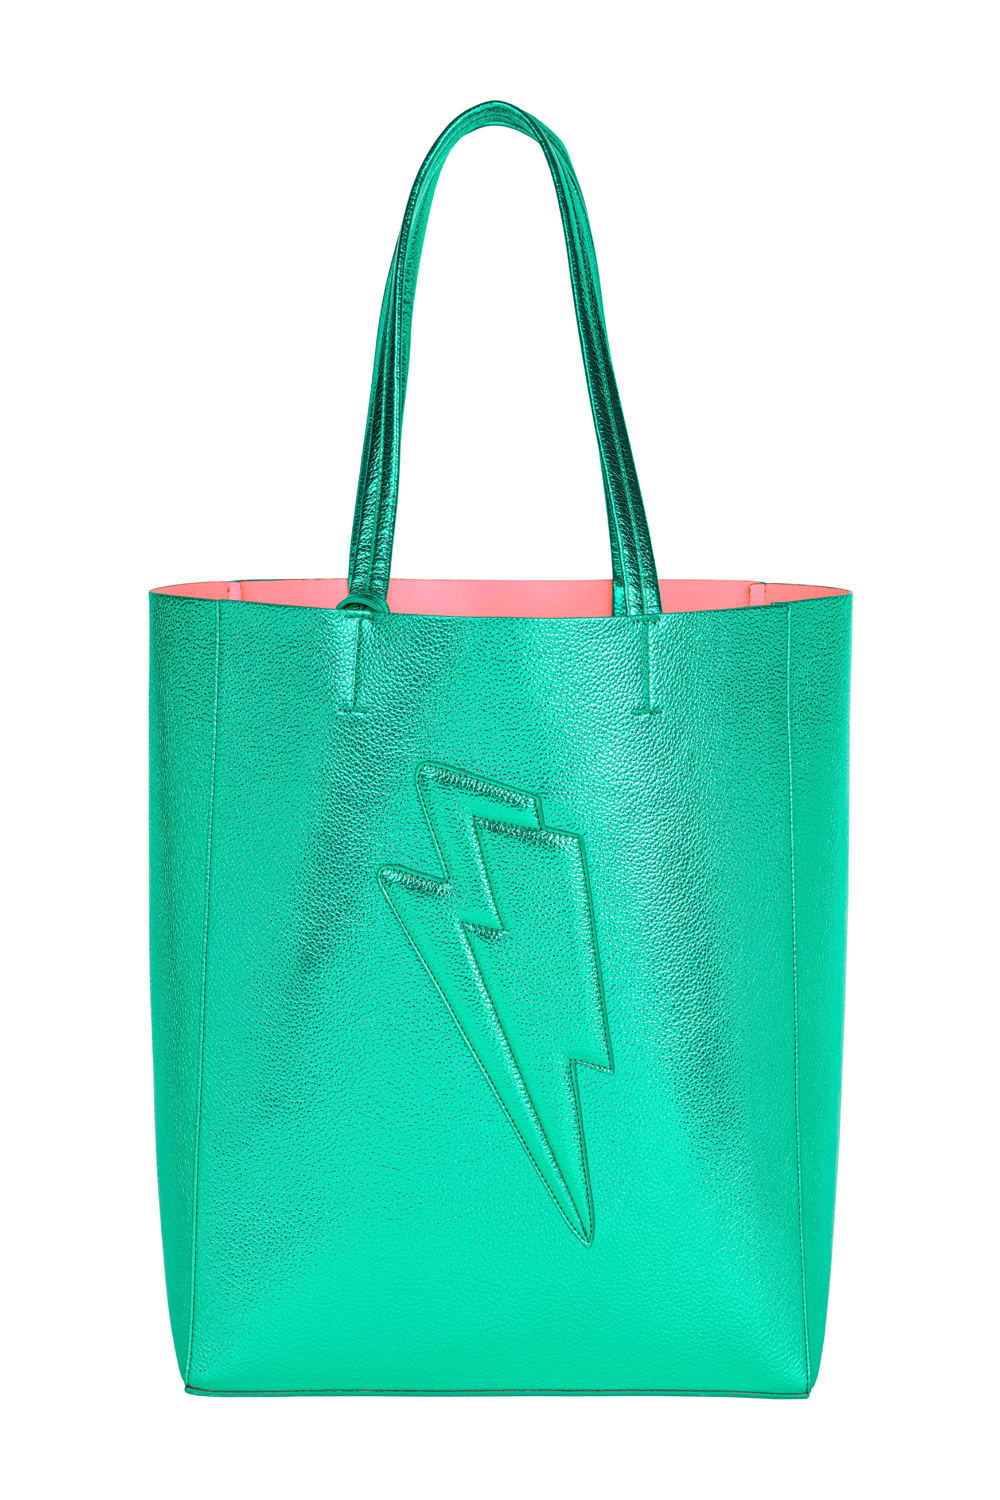 L.A.M.B. Manchester Rainforest Green Ombre Tote Bag With Matching